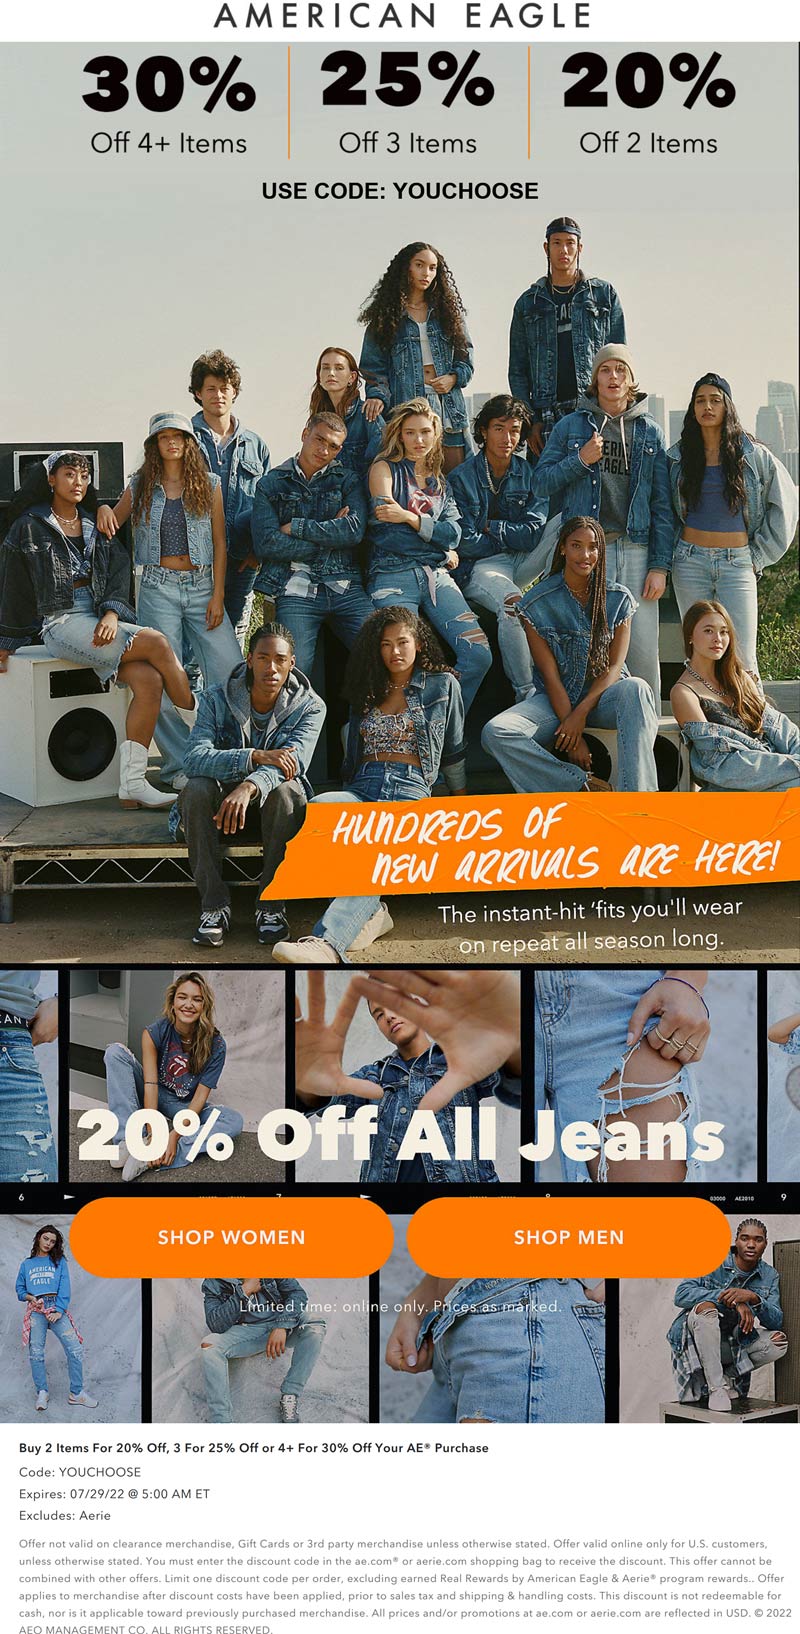 American Eagle stores Coupon  20-30% off 2+ items online at American Eagle via promo code YOUCHOOSE #americaneagle 